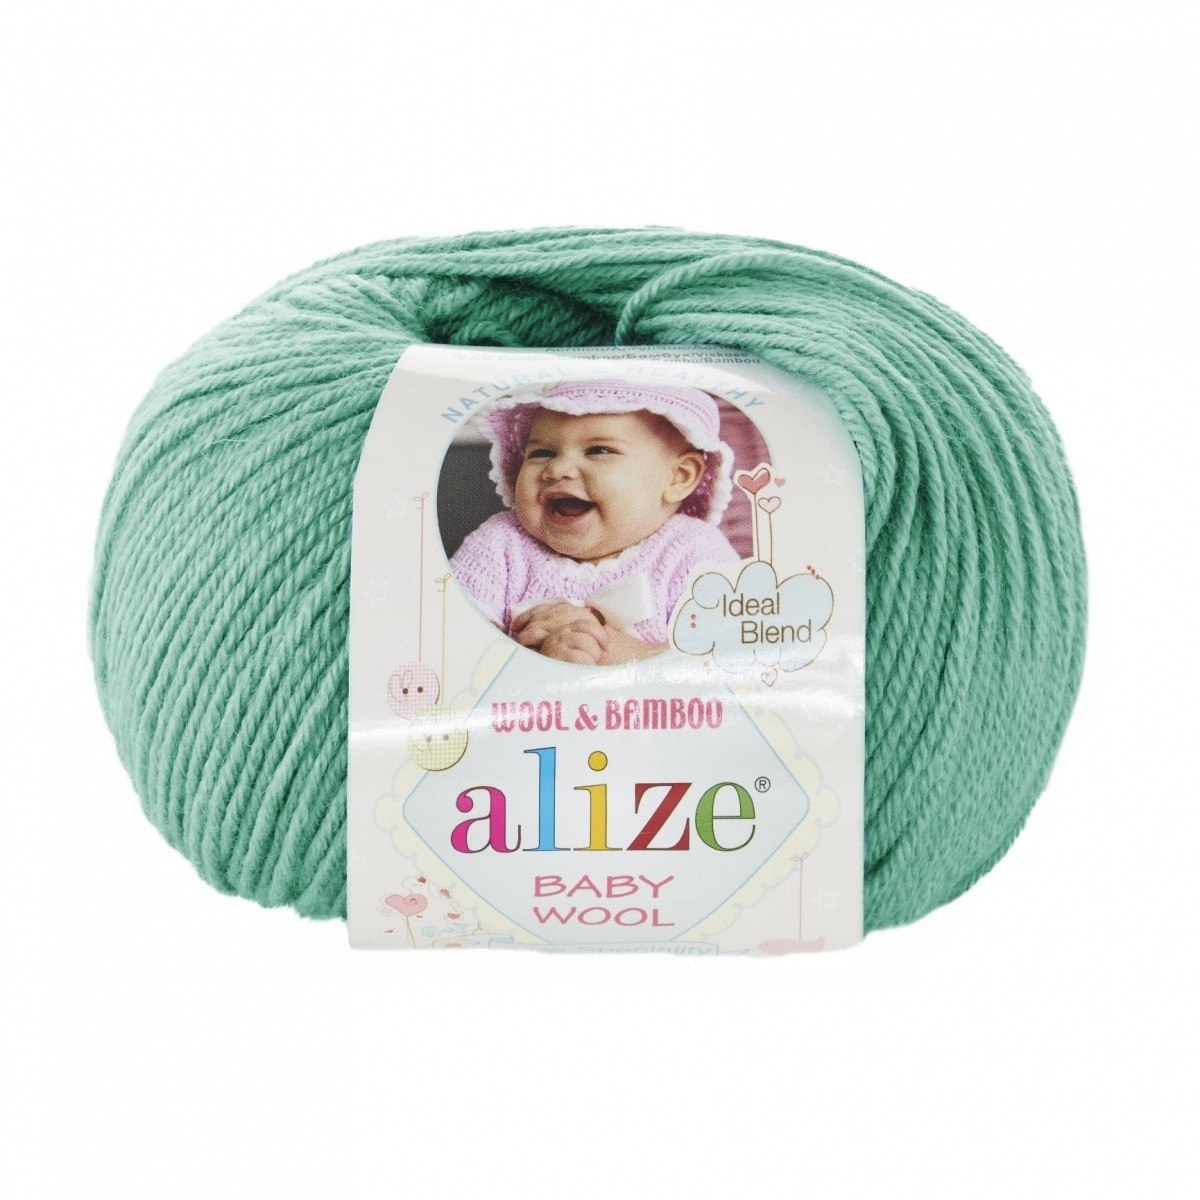 Alize "Baby wool" (610)